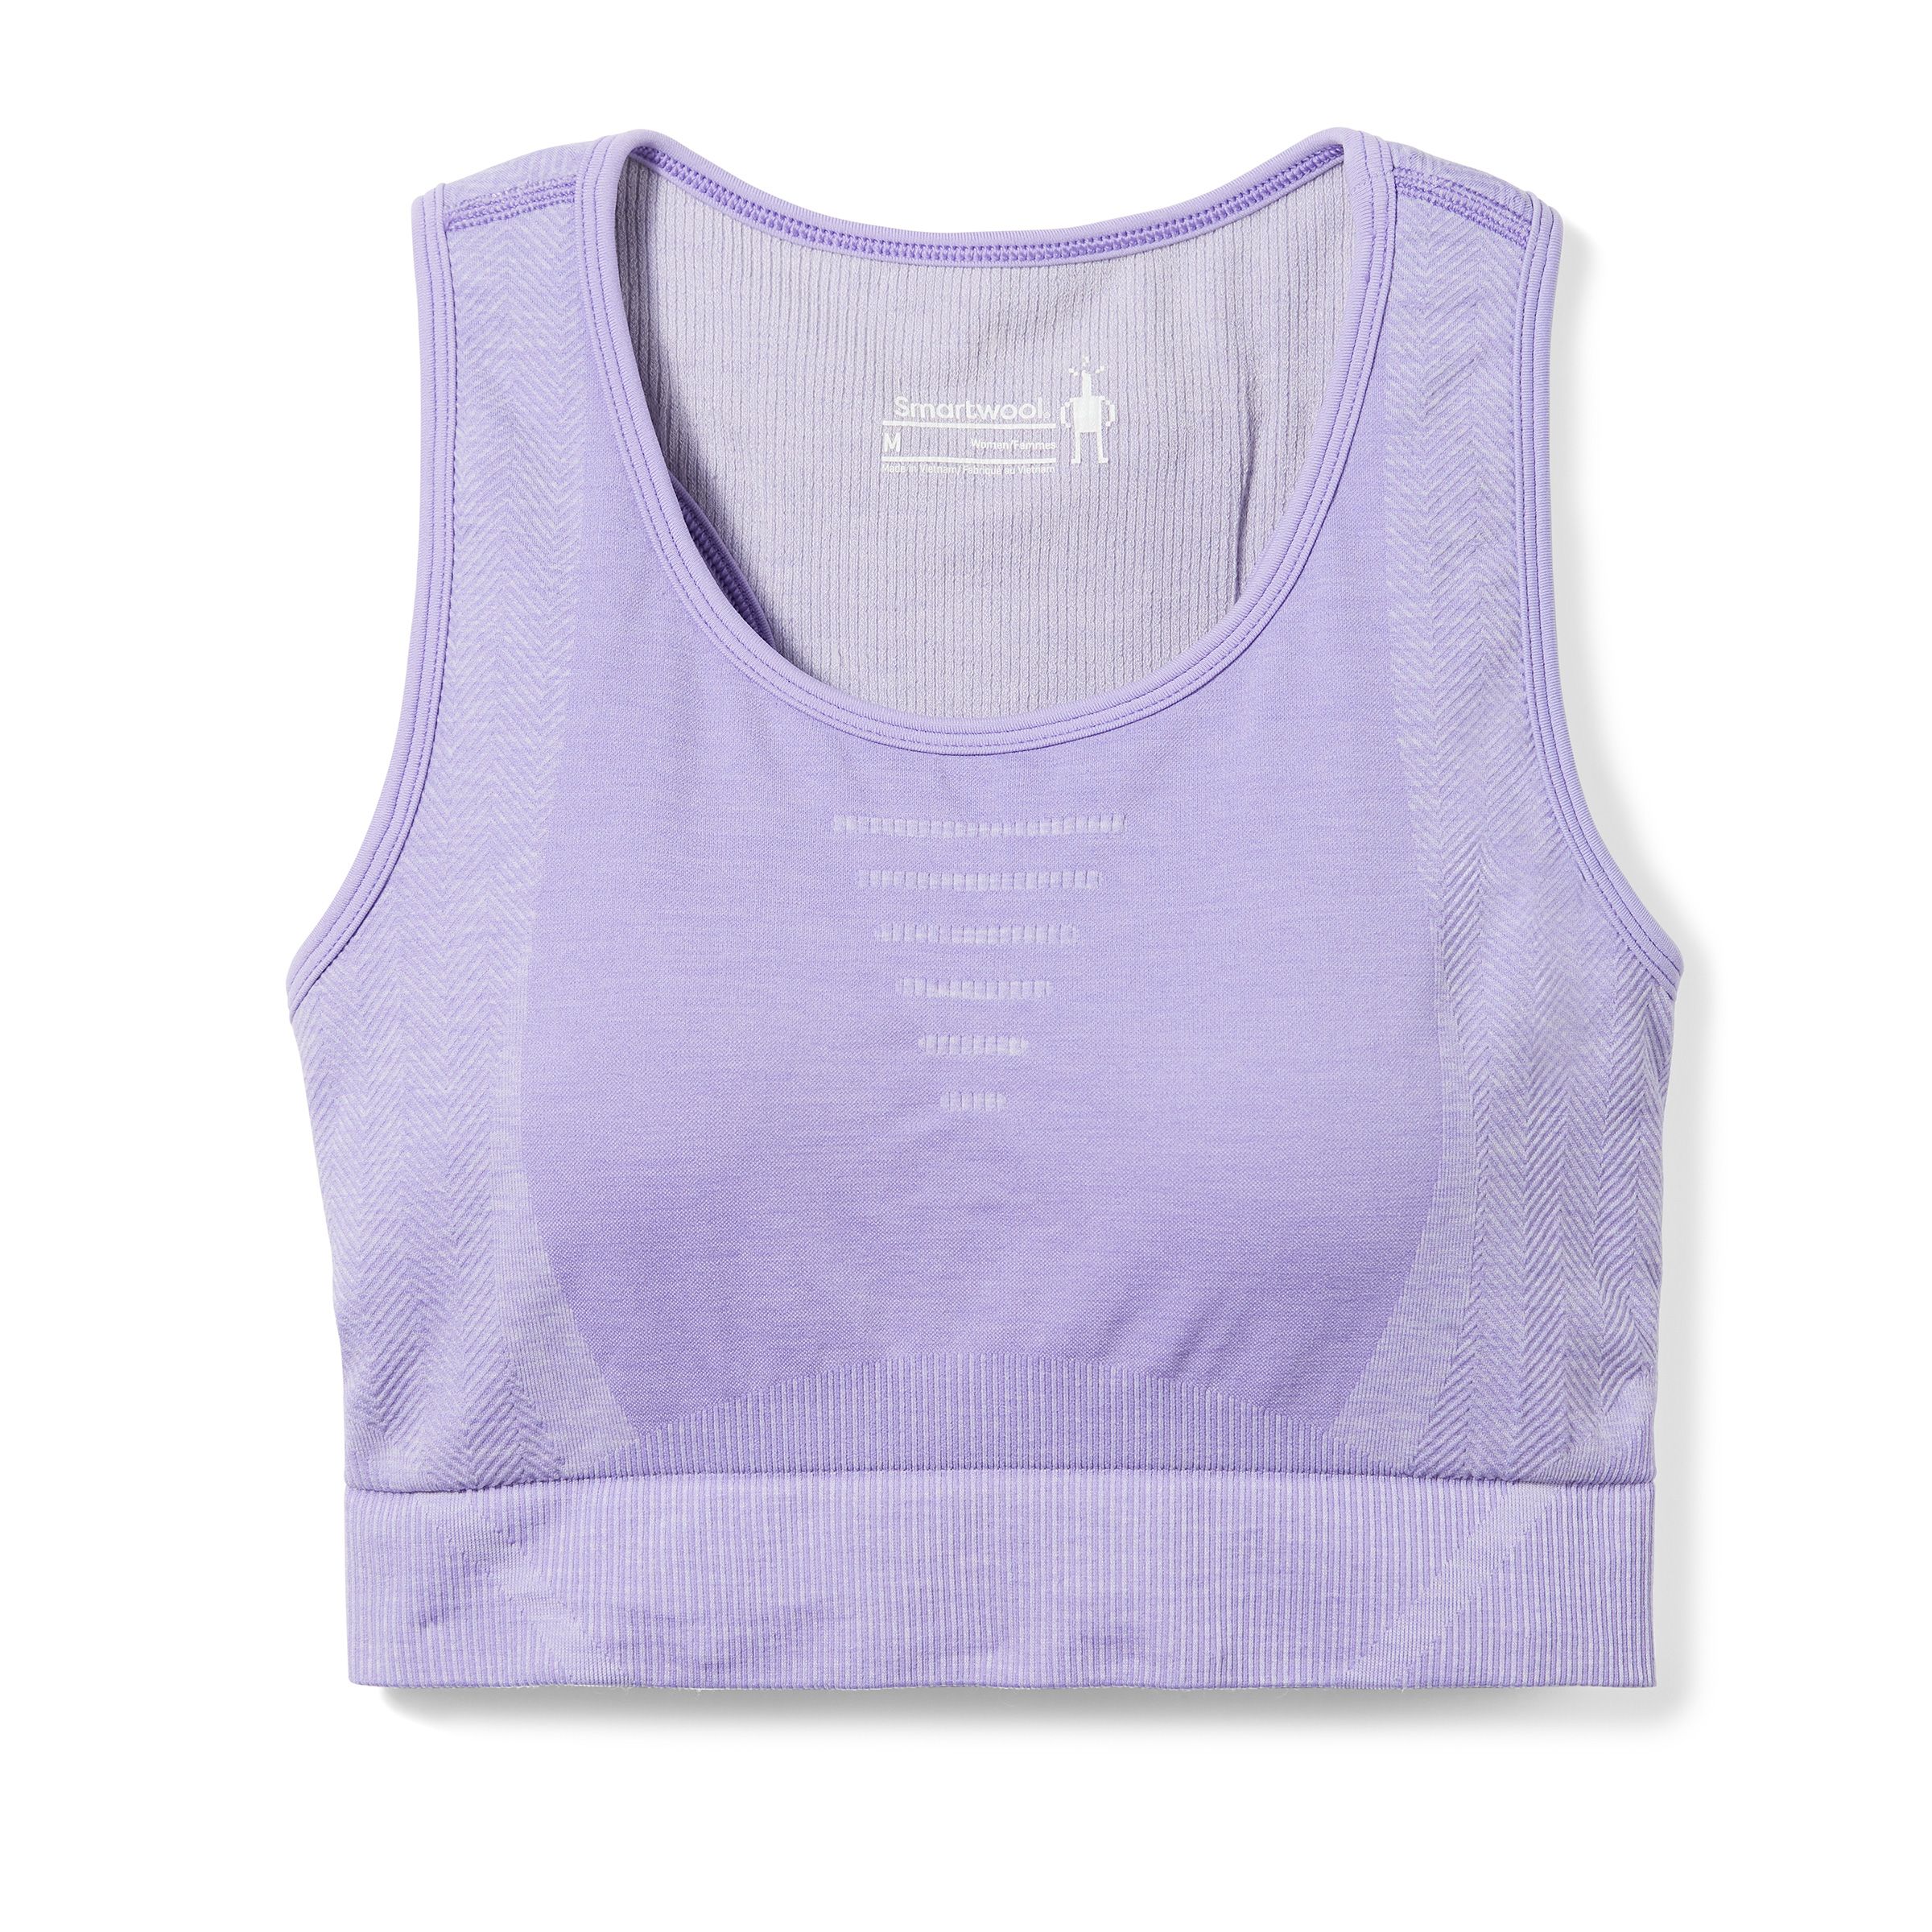 GUESS Women's Aline Eco Stretch Active Sports Bra, Color: Lilac Cream,  Size: L : Buy Online at Best Price in KSA - Souq is now : Fashion